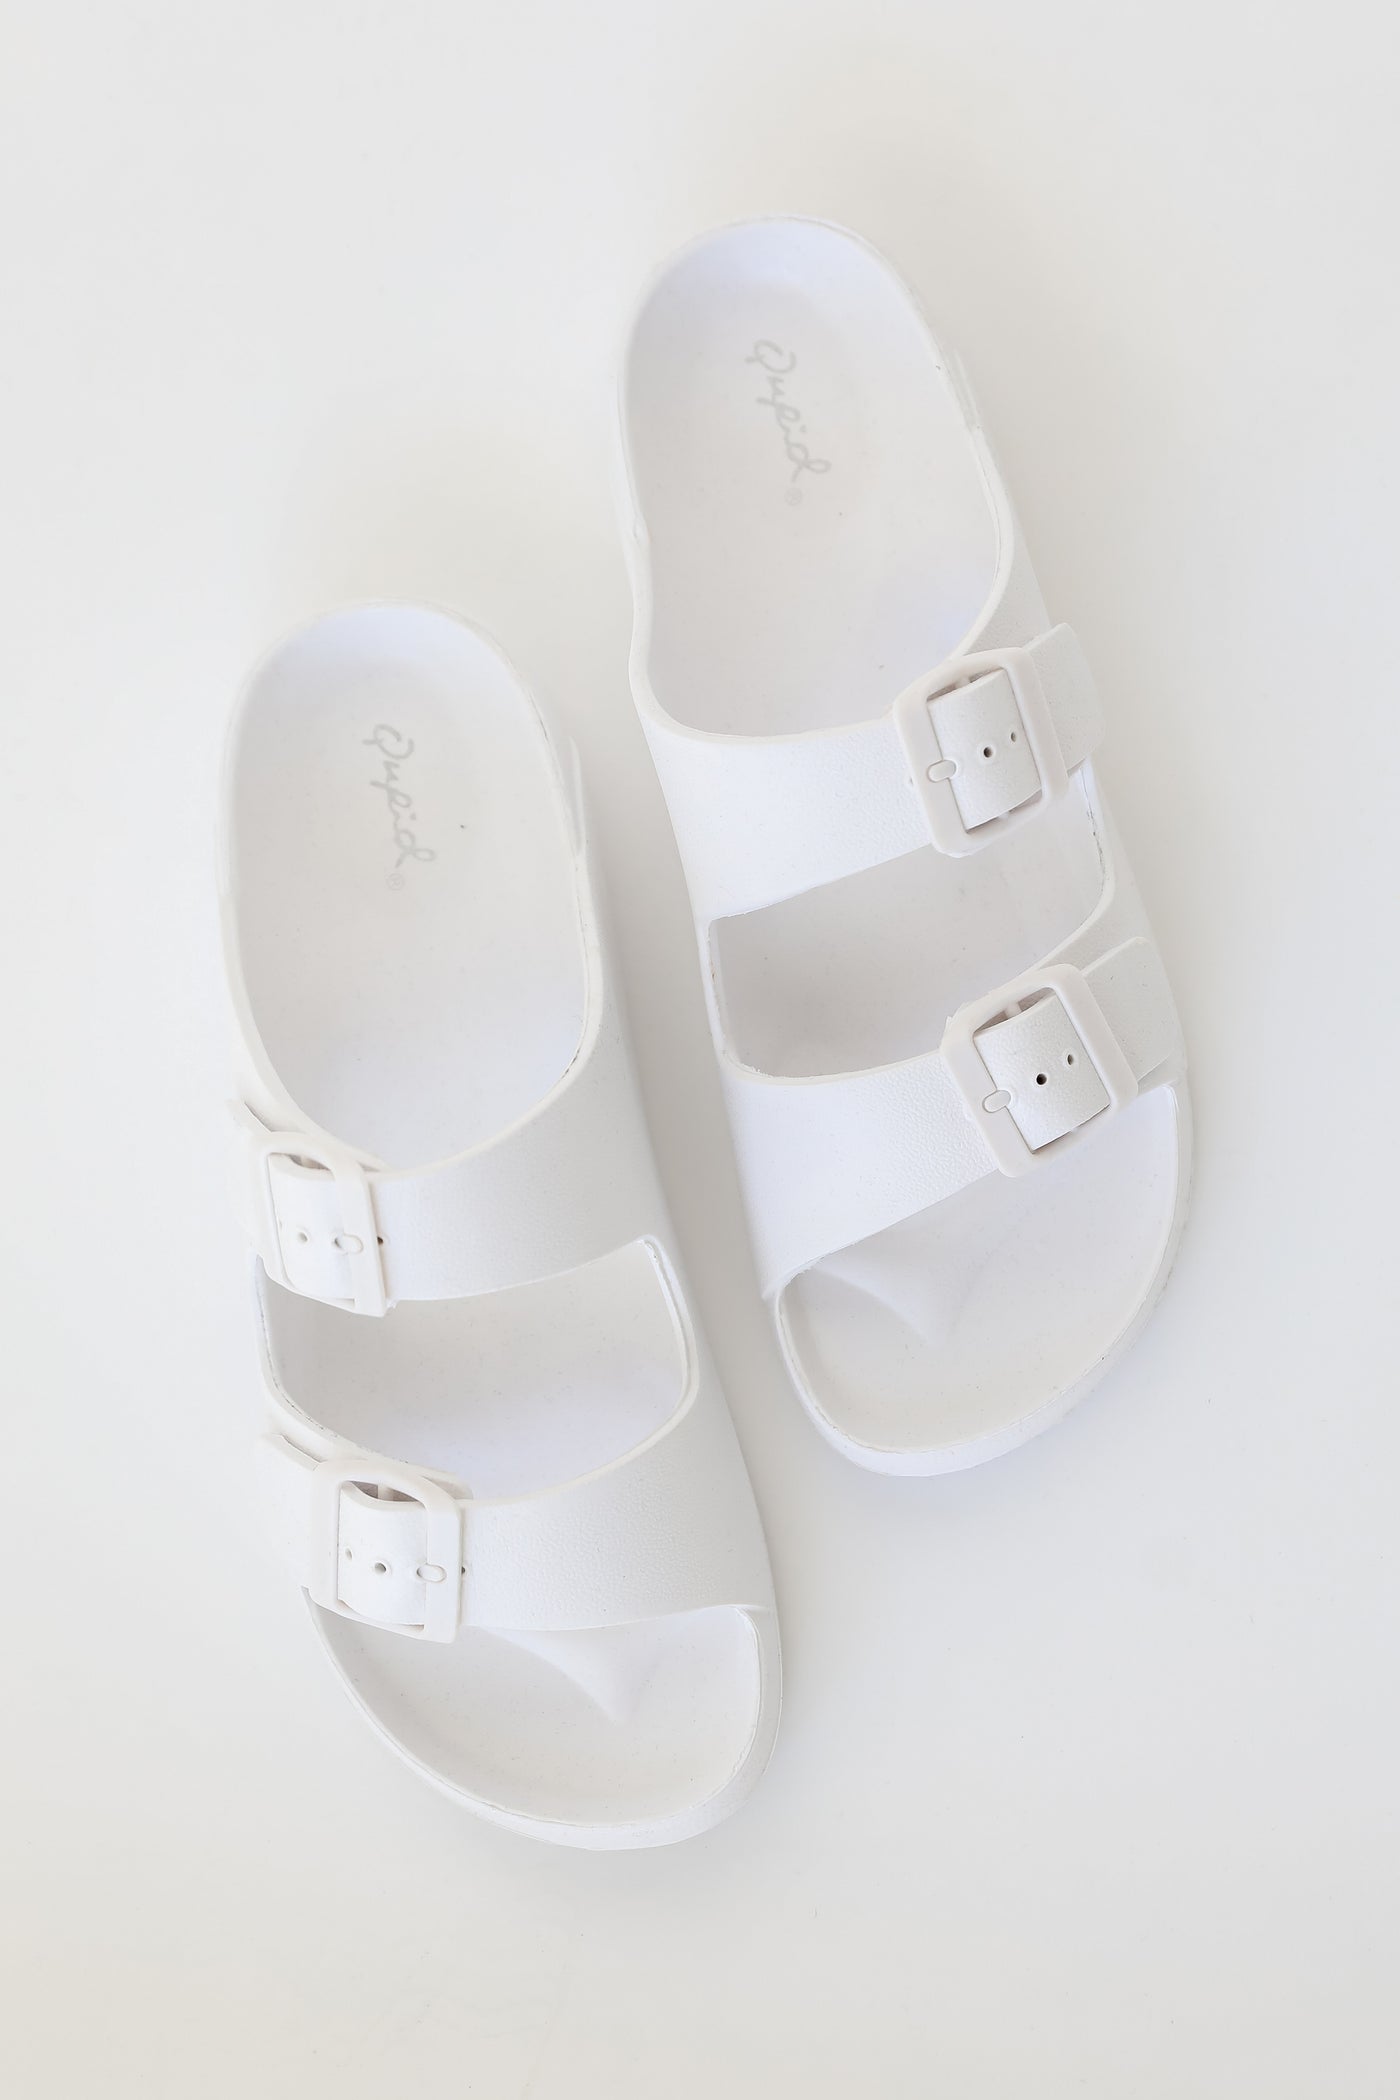 Double Strap Sandals in white top view